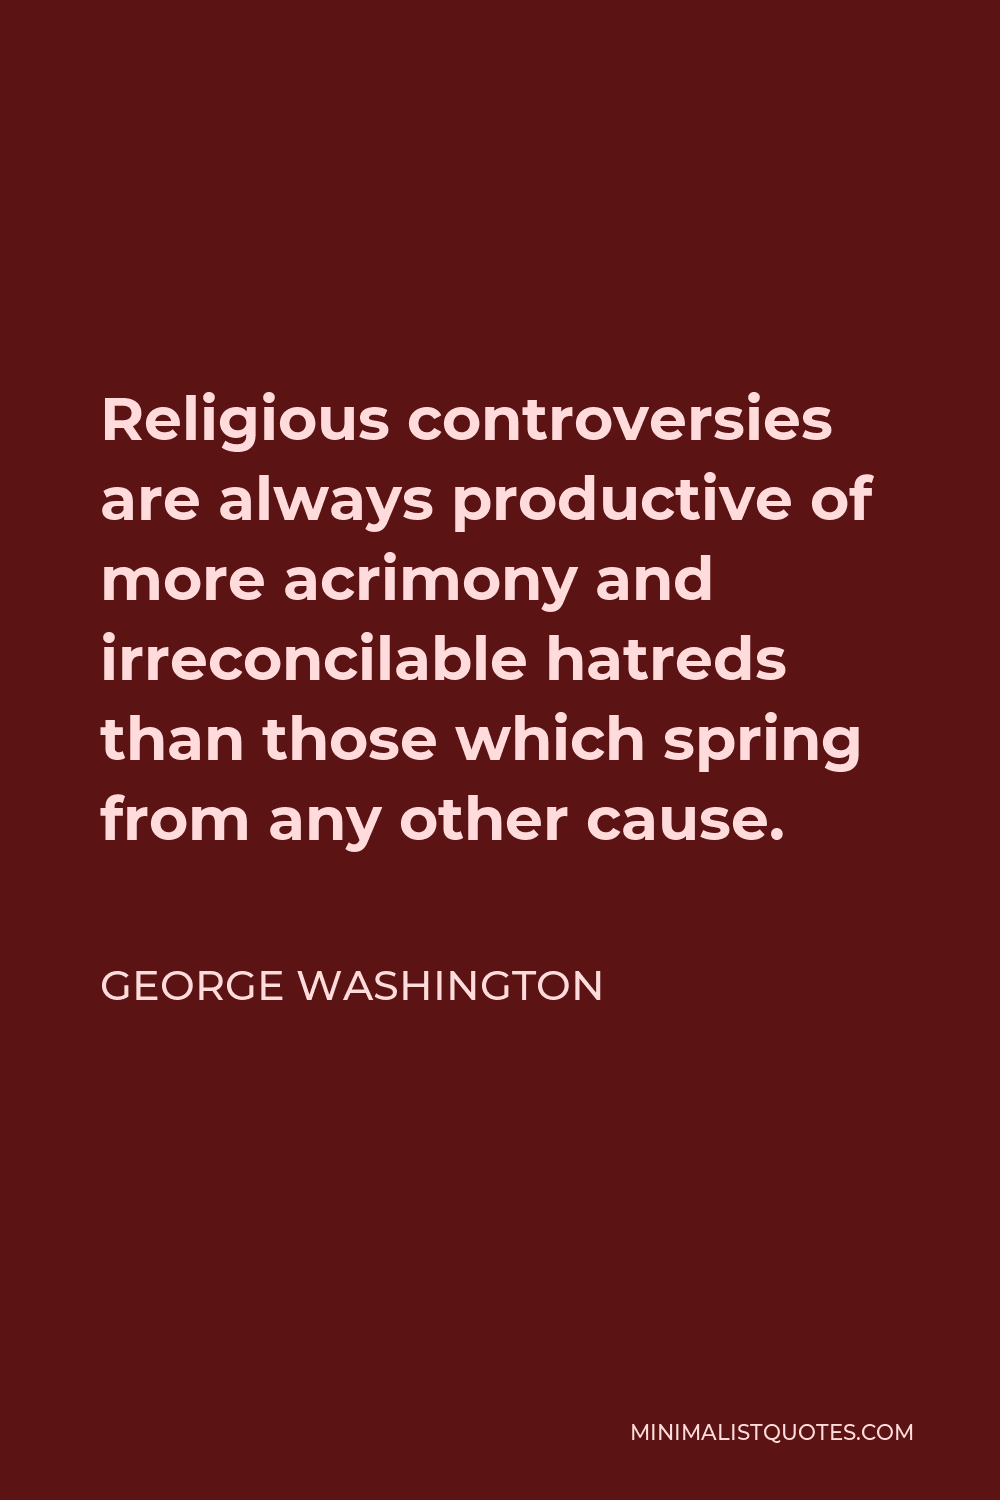 George Washington Quote - Religious controversies are always productive of more acrimony and irreconcilable hatreds than those which spring from any other cause.